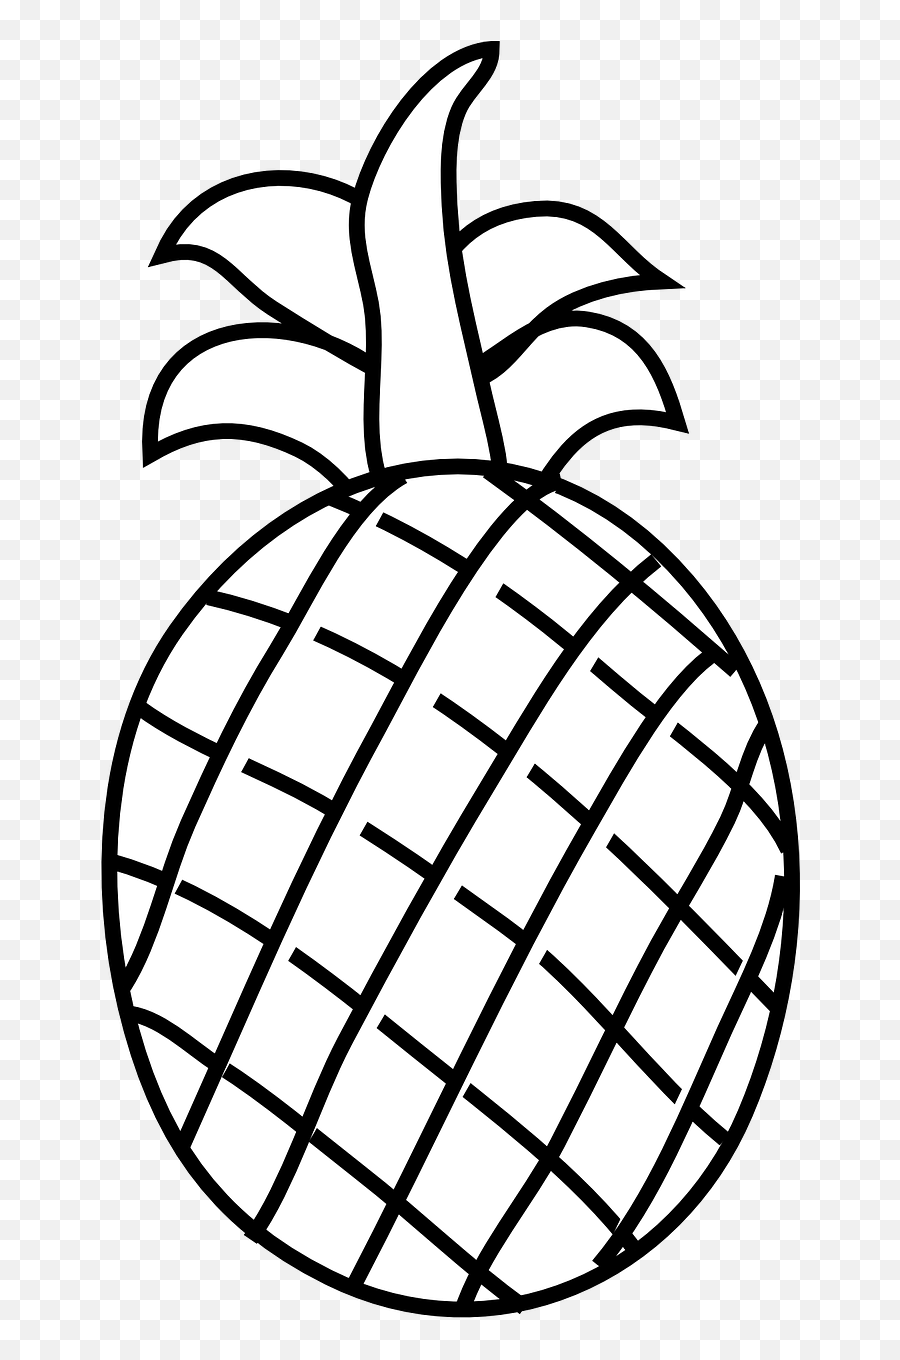 Download Hd Pineapple Fruit Food - Outline Fruits Clipart Black And White Emoji,Fruits Clipart